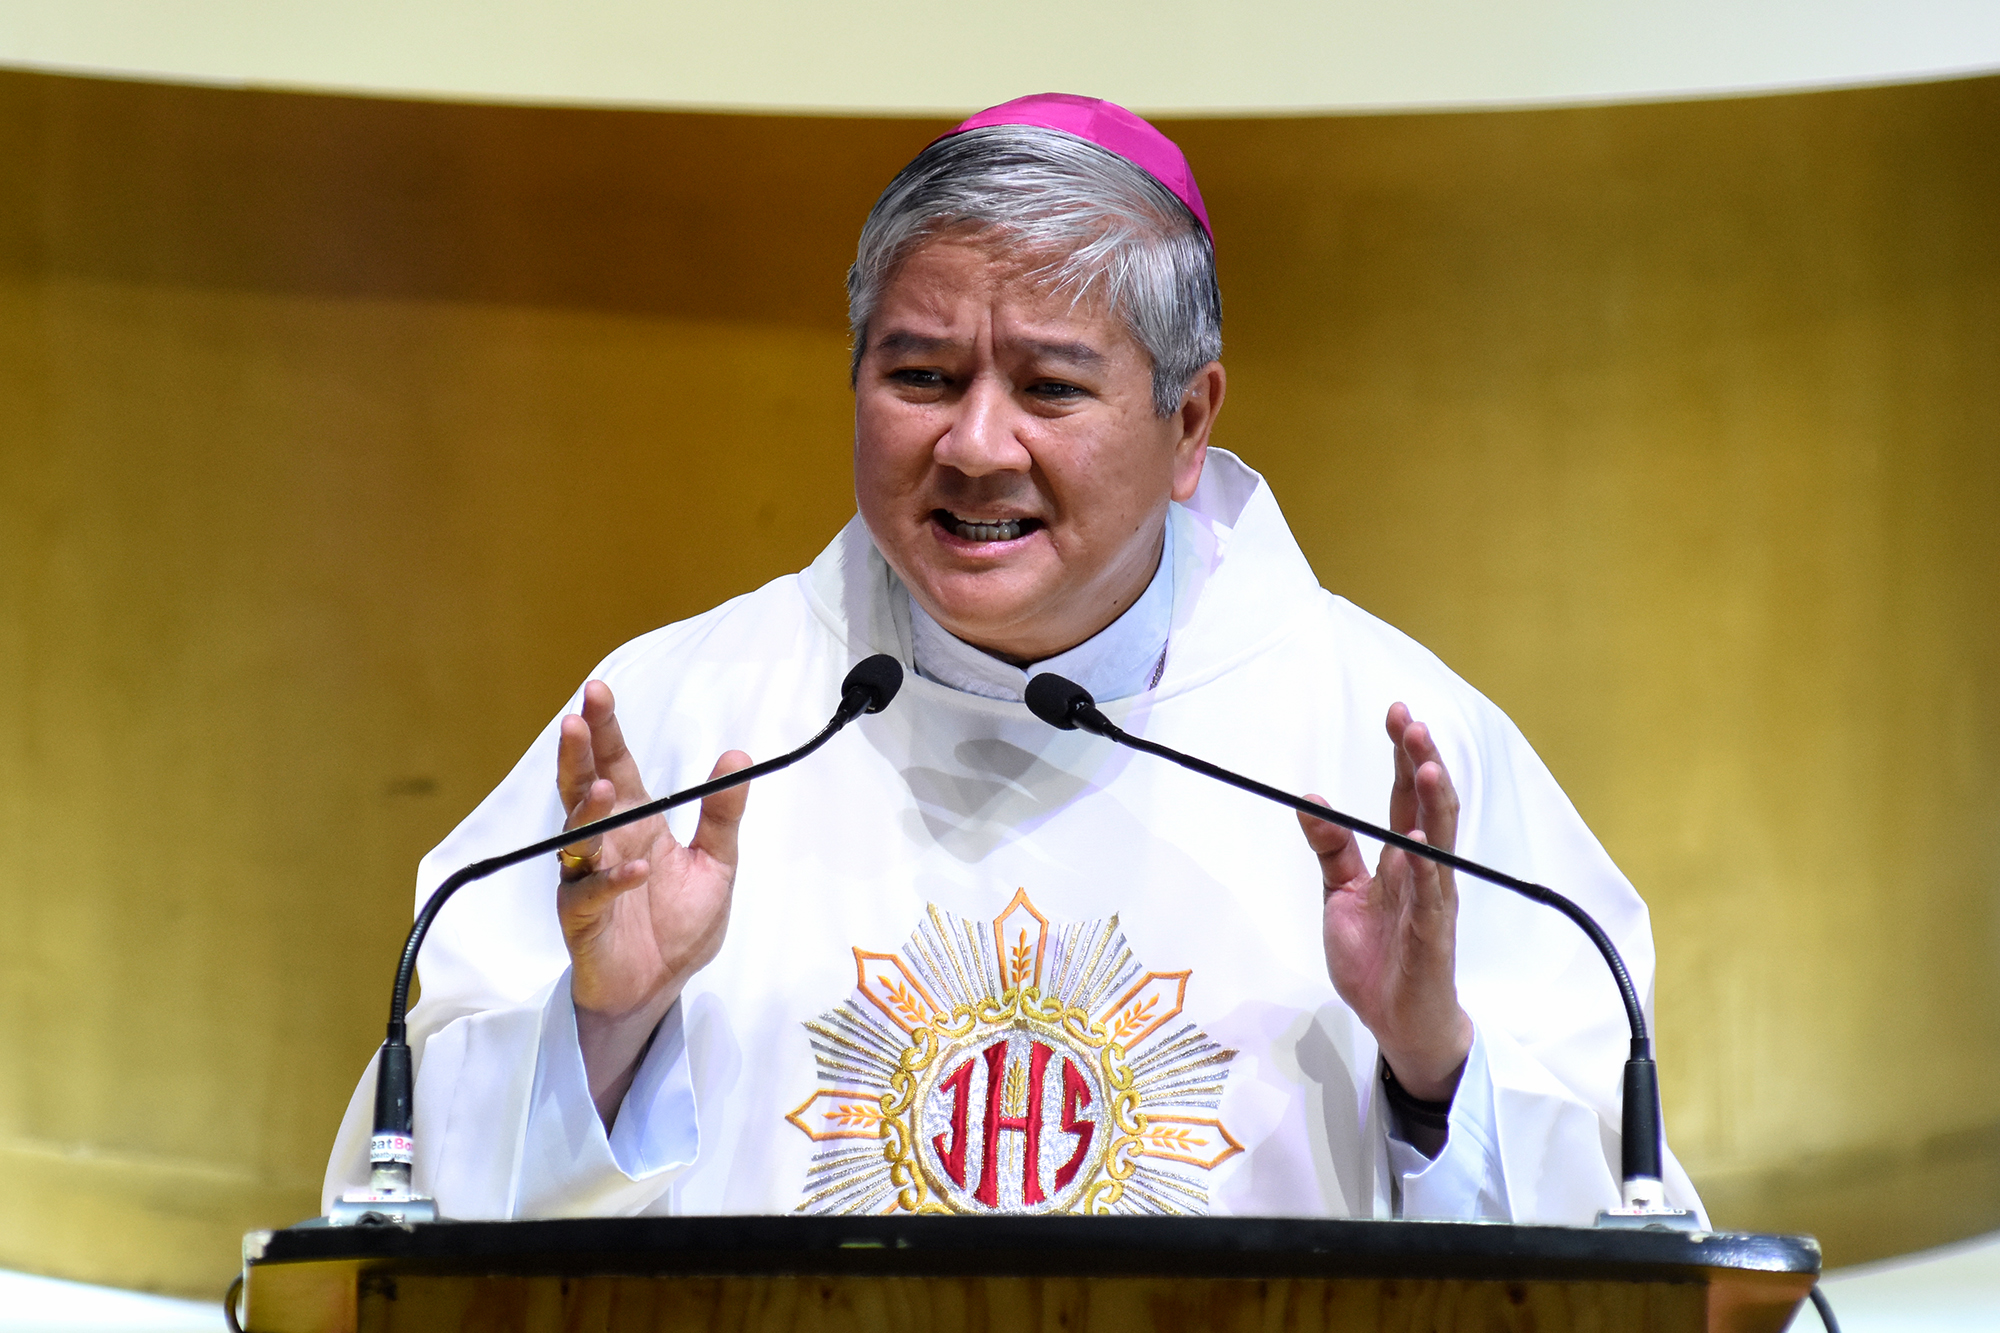 IT'S A SIN. Lingayen-Dagupan Archbishop Socrates Villegas, president of the CBCP, tells Catholics that spreading fake news is 'a sin against charity.' File photo by Angie de Silva/Rappler 